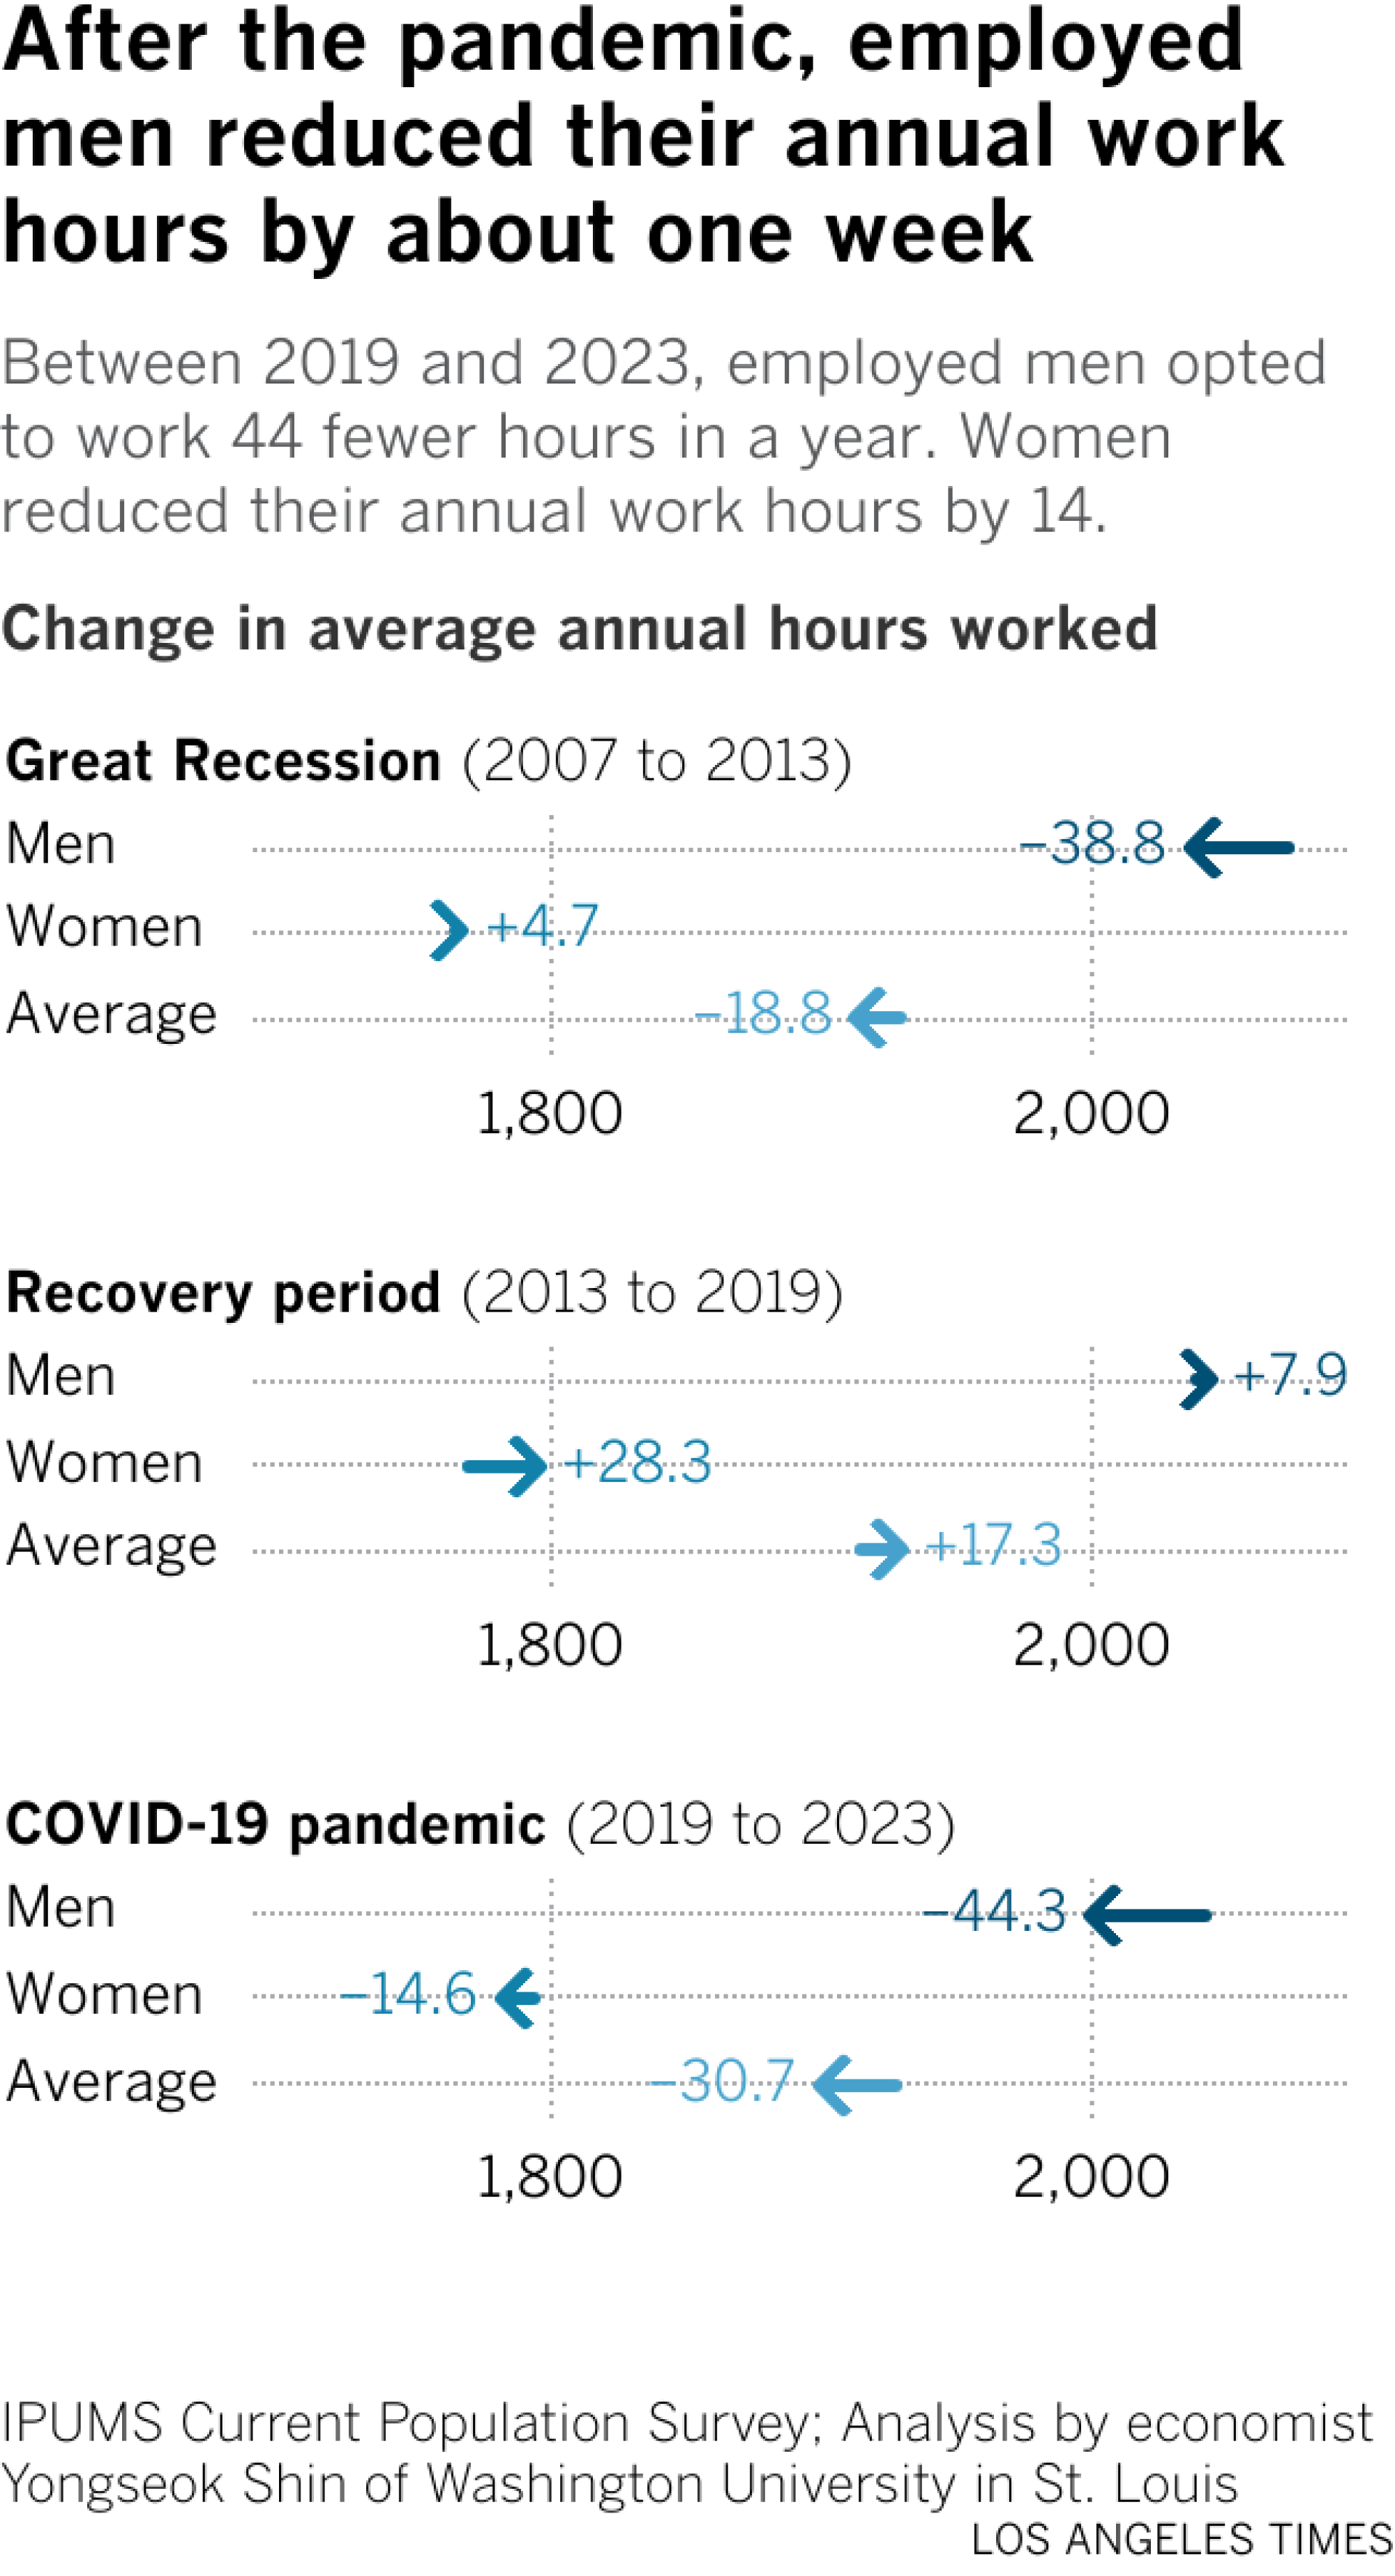 An arrow plot shows how men and women's working hours have changed over time. During the Great Recession, men reduced their working hours by 38.8, where as women increased slightly. During the recovery period from 2013 to 2019, men and women increased their hours by about 8 and 28 hours, respectively. Between 2019 and 2023, men worked 44.3 hours less and women worked 14.6 hours less.